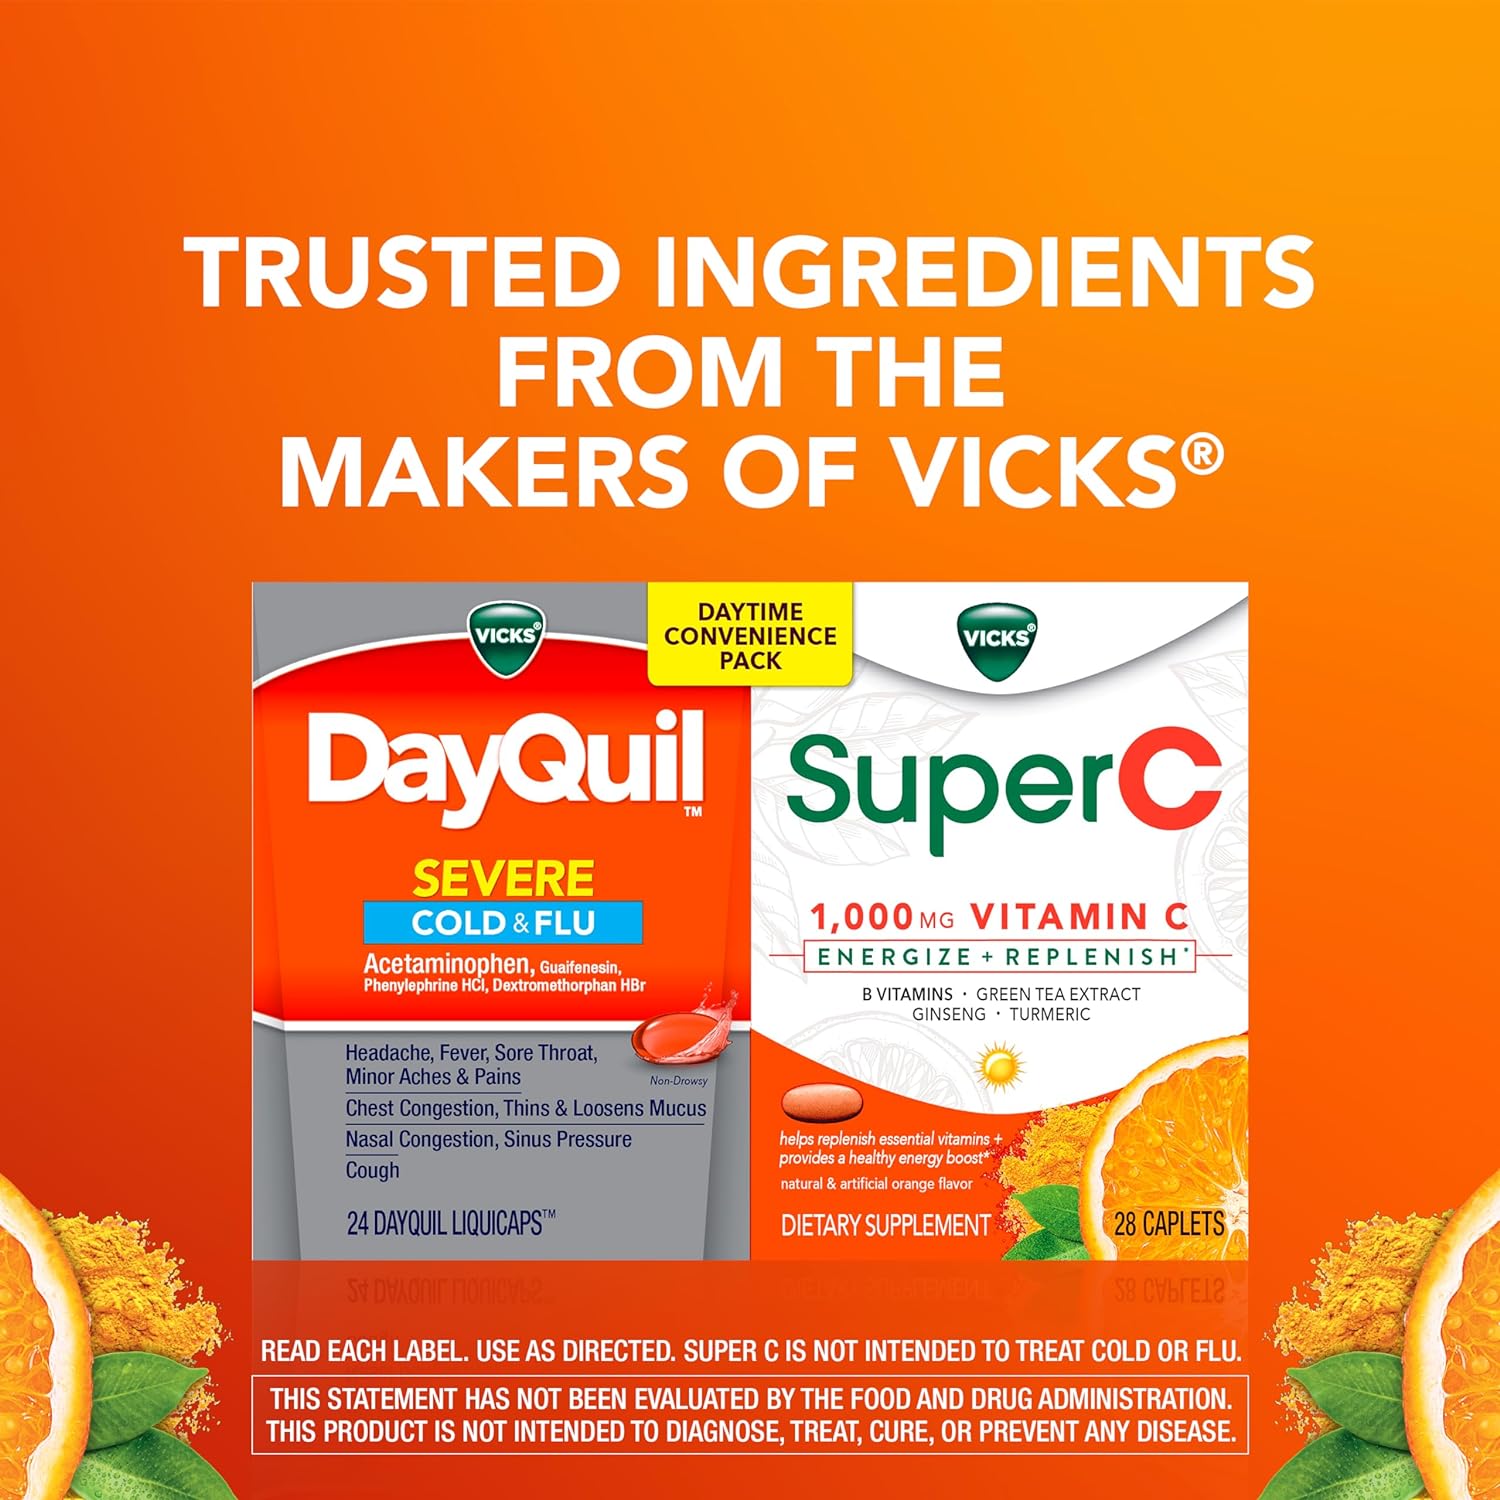 Vicks DayQuil & Super C Convenience Pack: DayQuil Severe Medicine for Cold & Flu Relief, Conveniently Packaged with Super C Energize and Replenish* Daily Supplement with Vitamin C, B Vitamins, 52ct : Health & Household